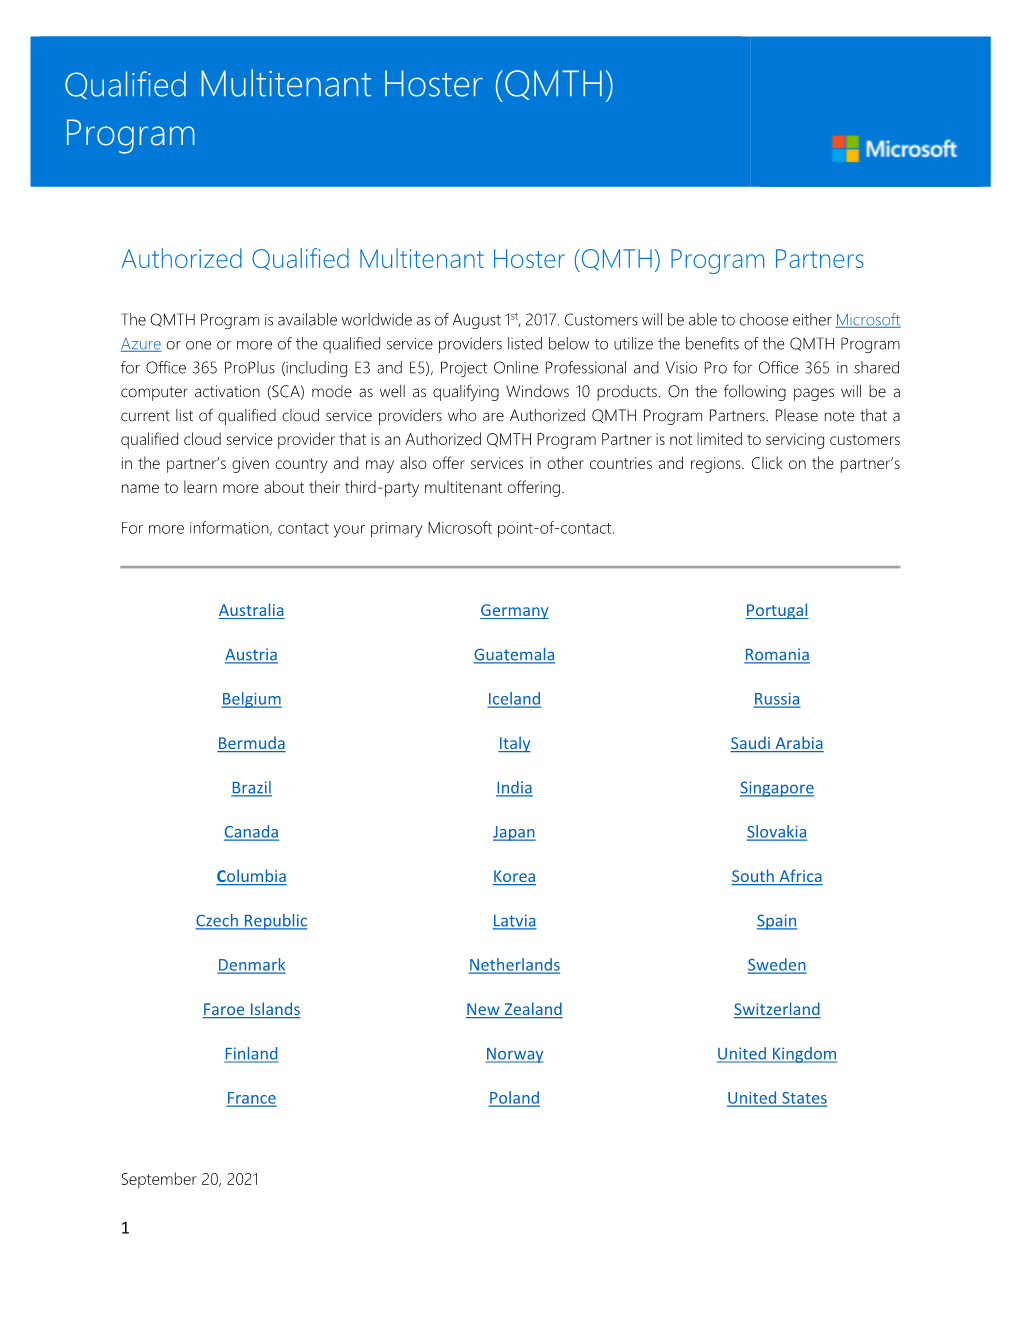 Authorized Qualified Multitenant Hoster (QMTH) Program Partners